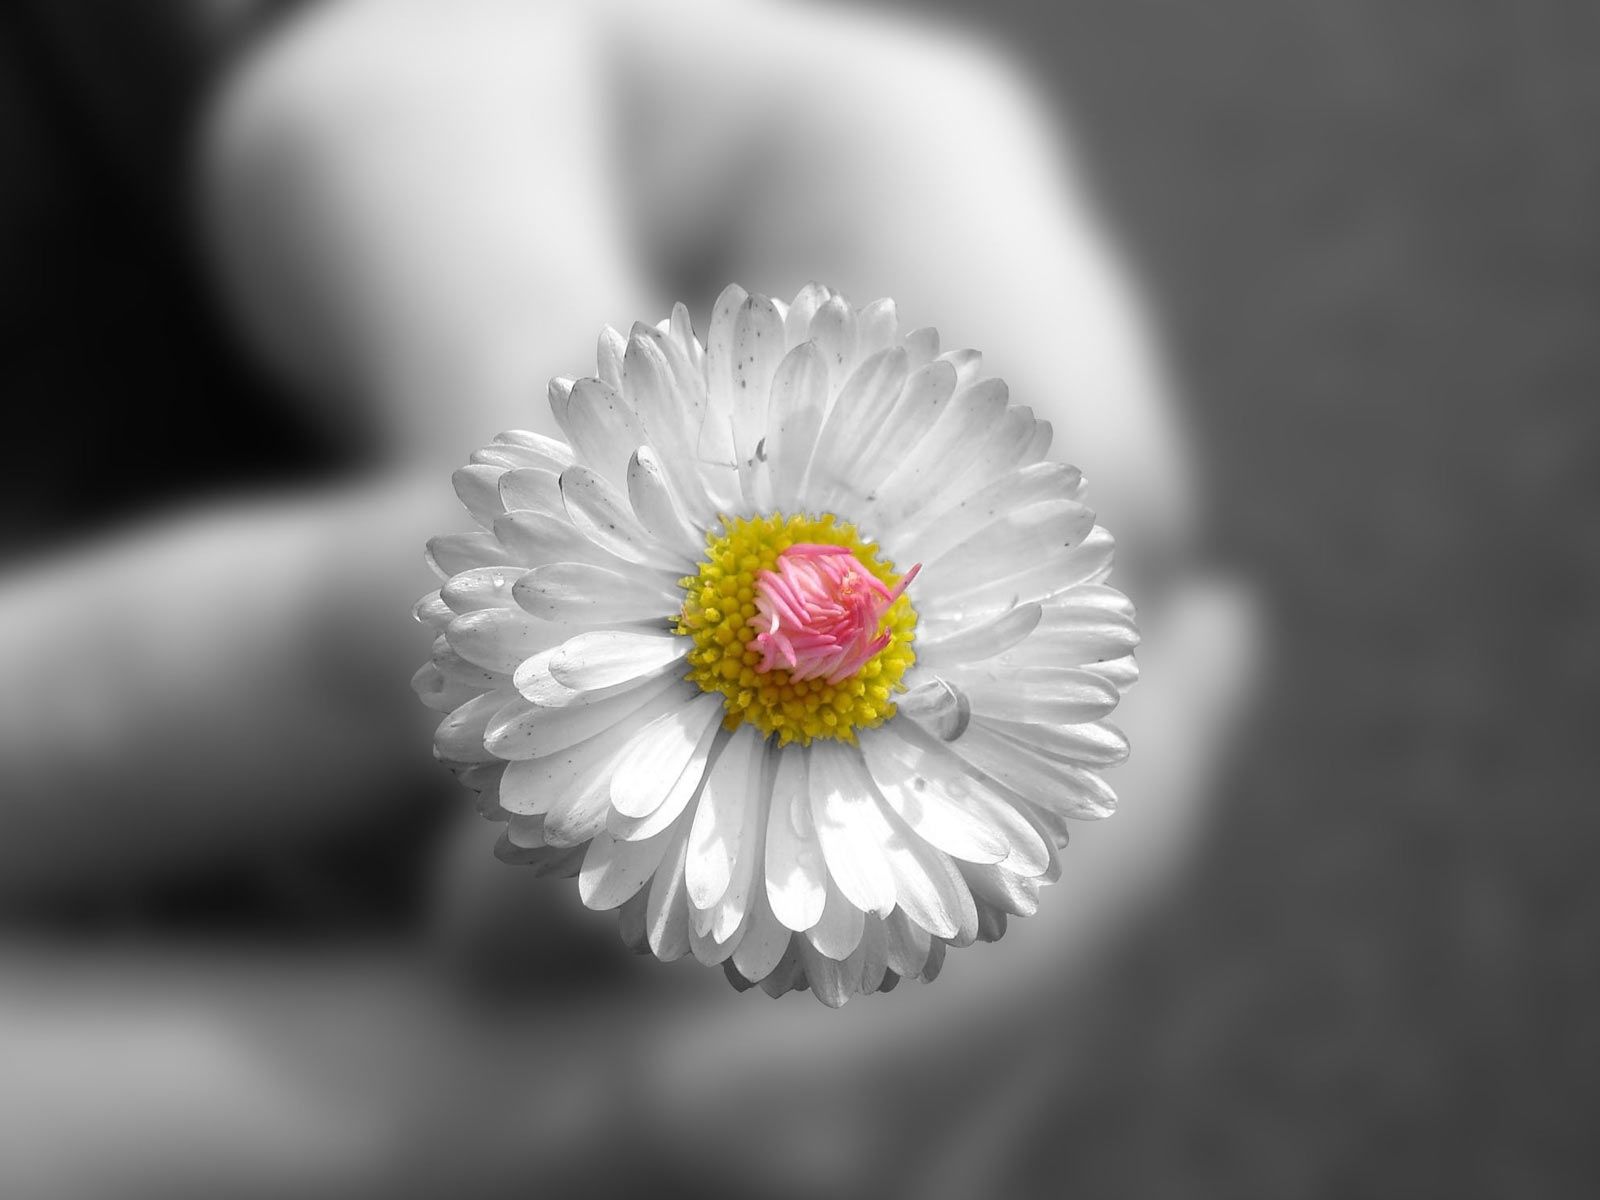 New Lock Screen Wallpapers camomile, flower, macro, hands, bw, chb, chamomile